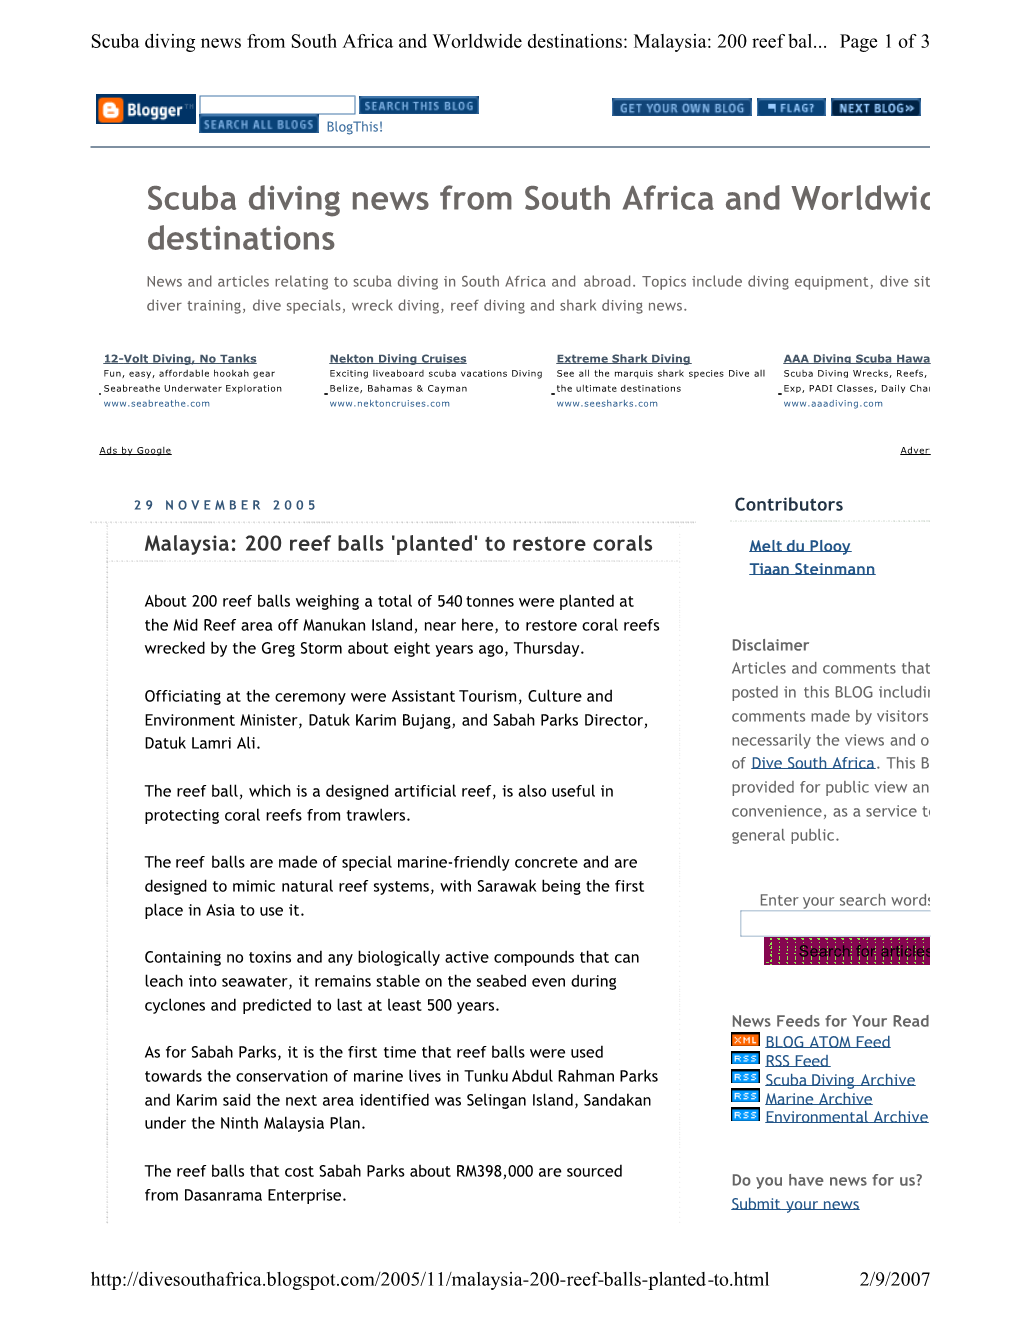 Scuba Diving News from South Africa and Worldwide Destinations: Malaysia: 200 Reef Bal